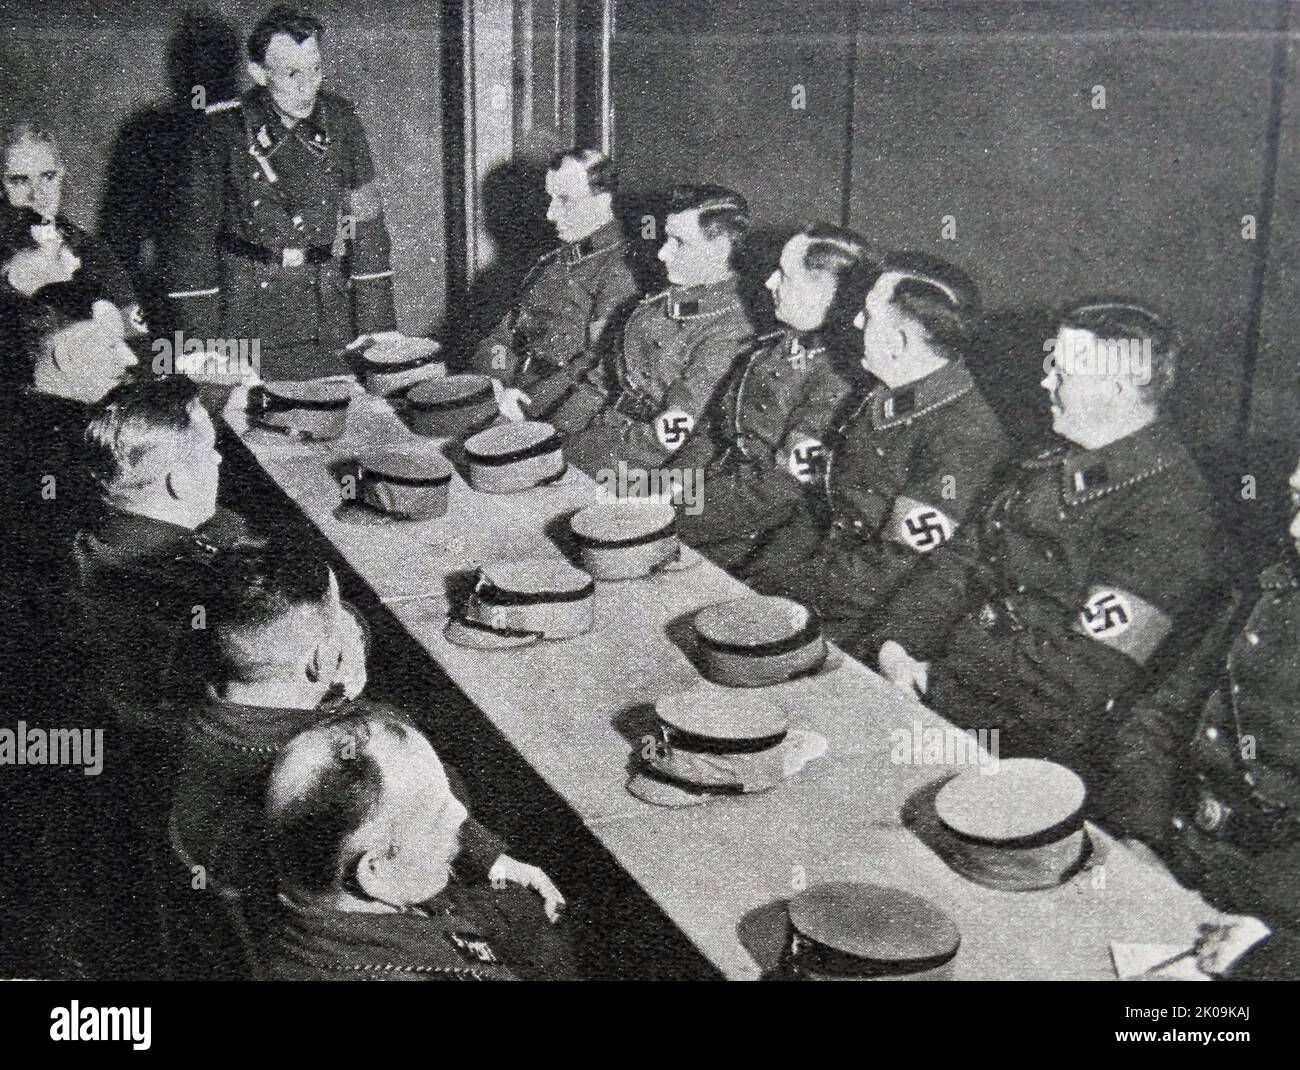 Johann Laub, at the local branch of a Nazi Storm Troopers meeting. The Sturmabteilung was the Nazi Party's original paramilitary wing. It played a significant role in Adolf Hitler's rise to power in the 1920s and 1930s. Stock Photo